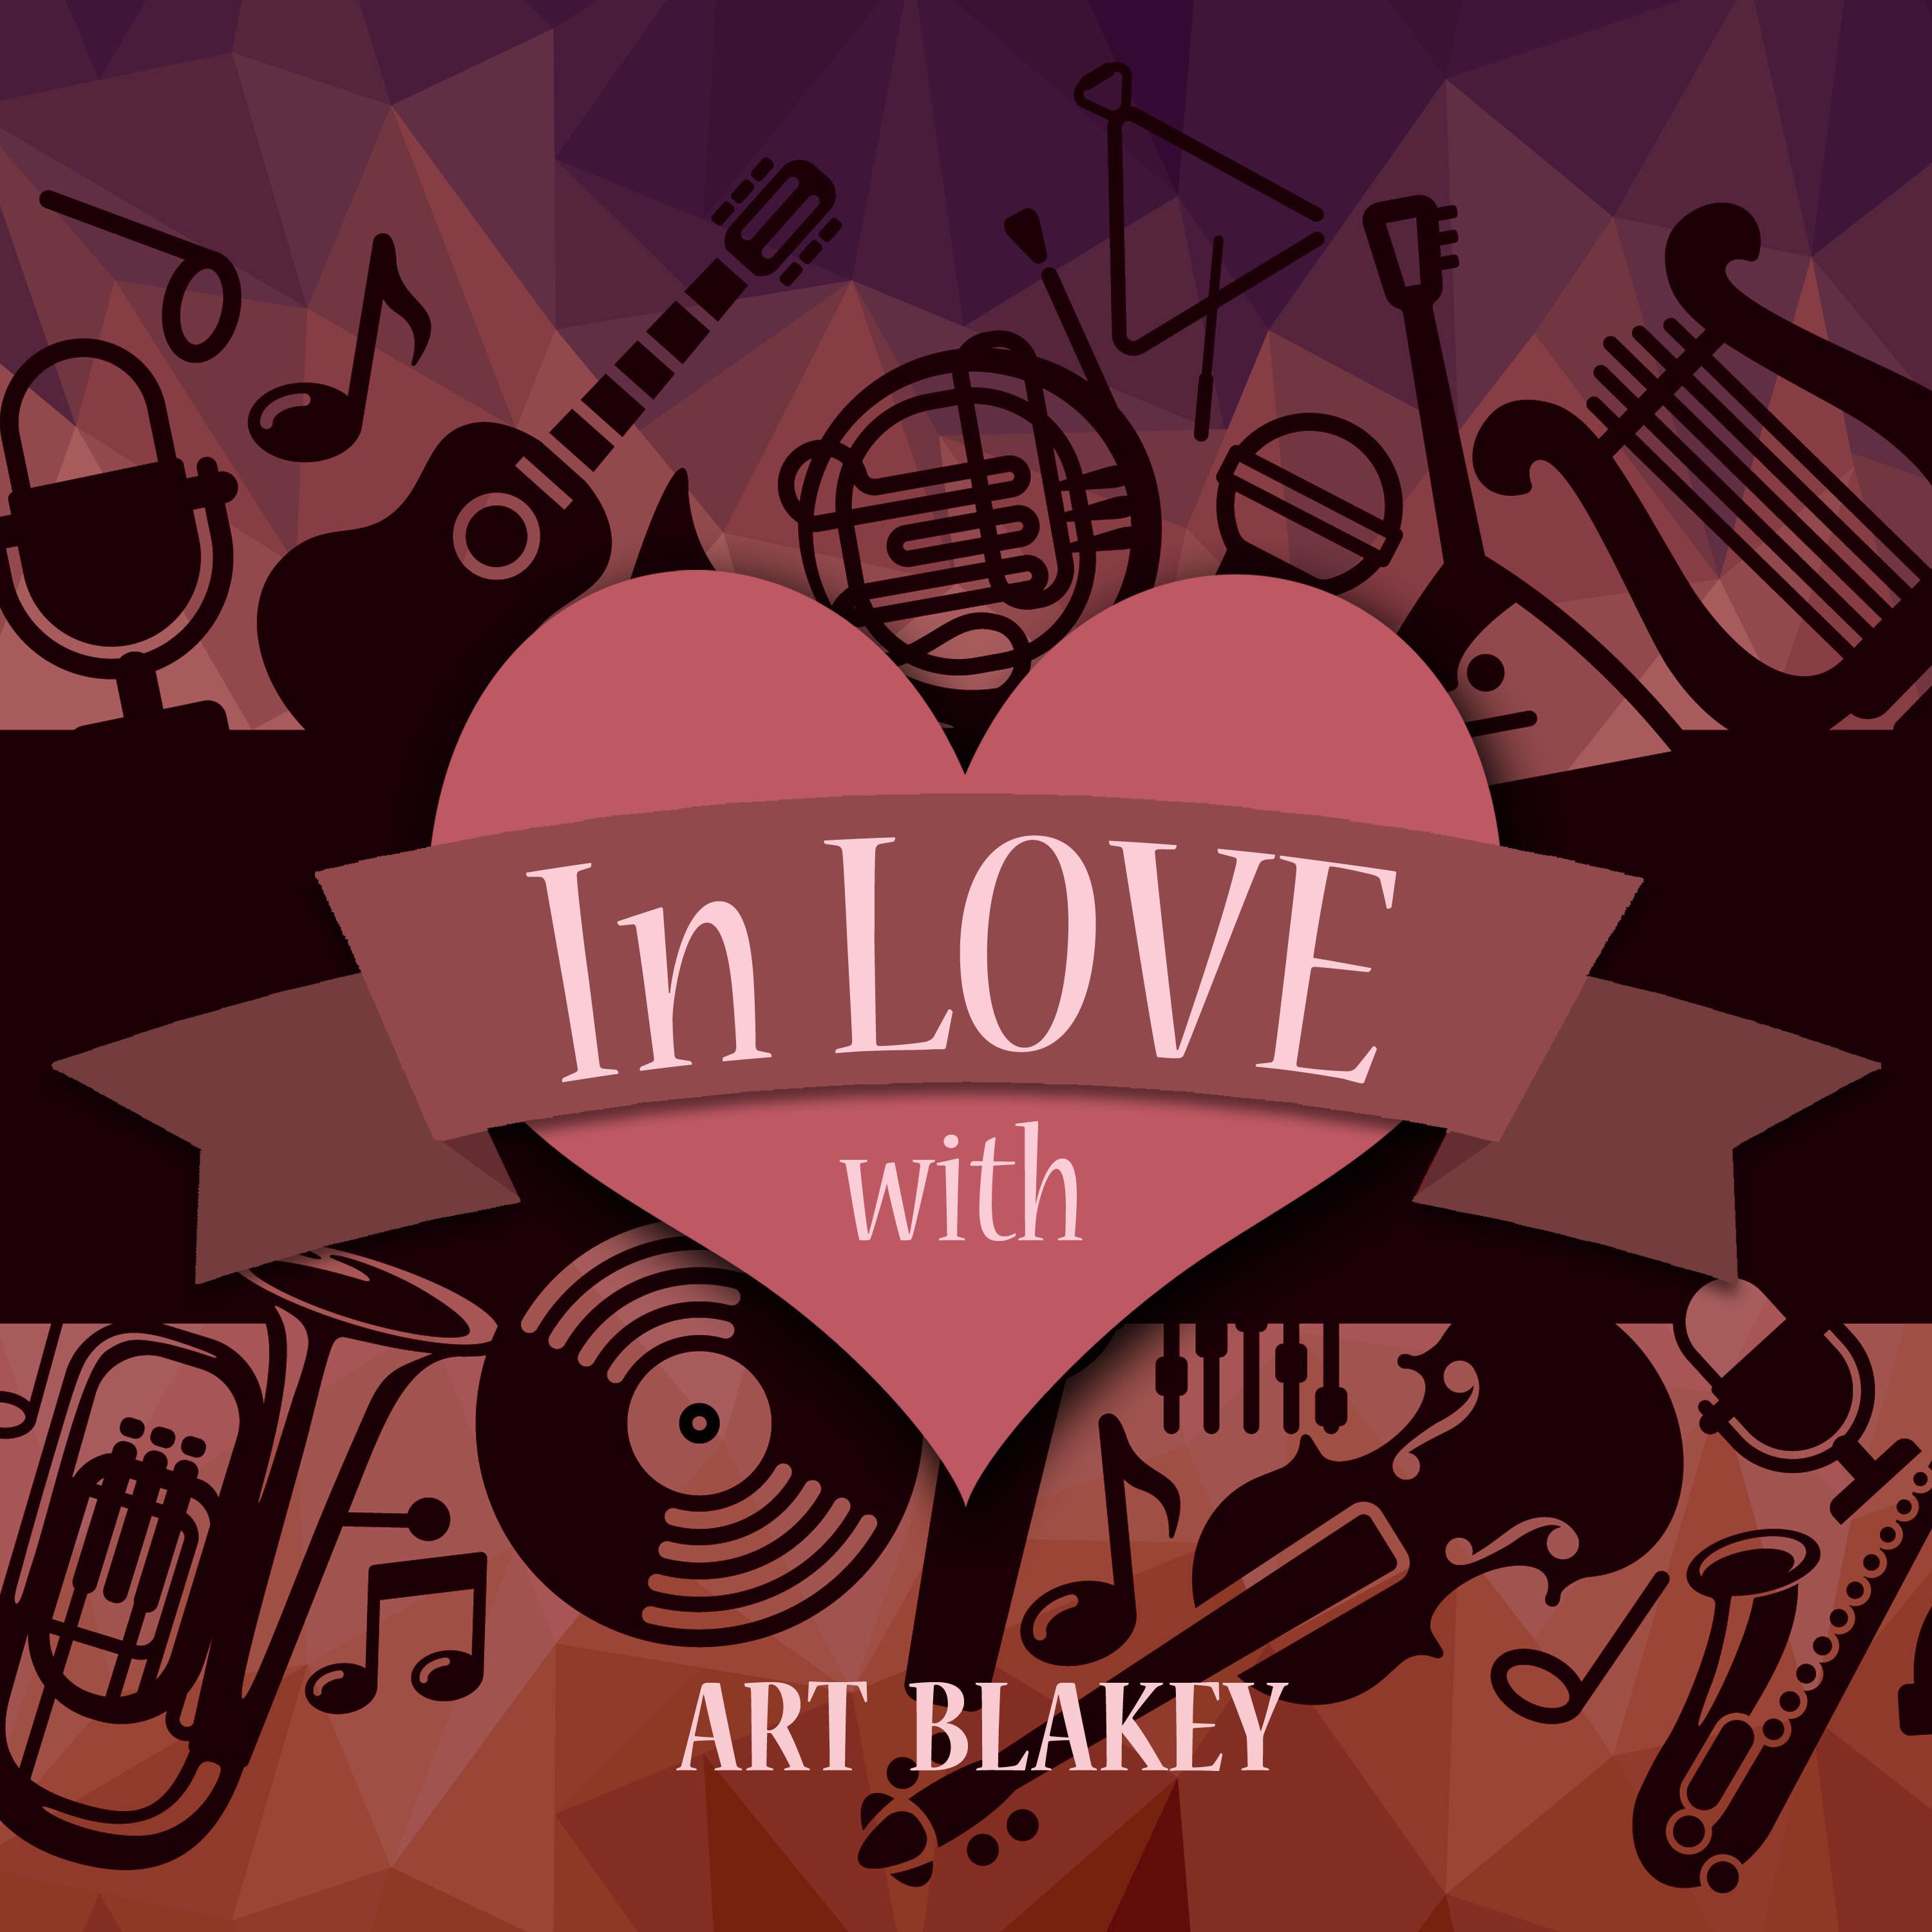 In Love with Art Blakey